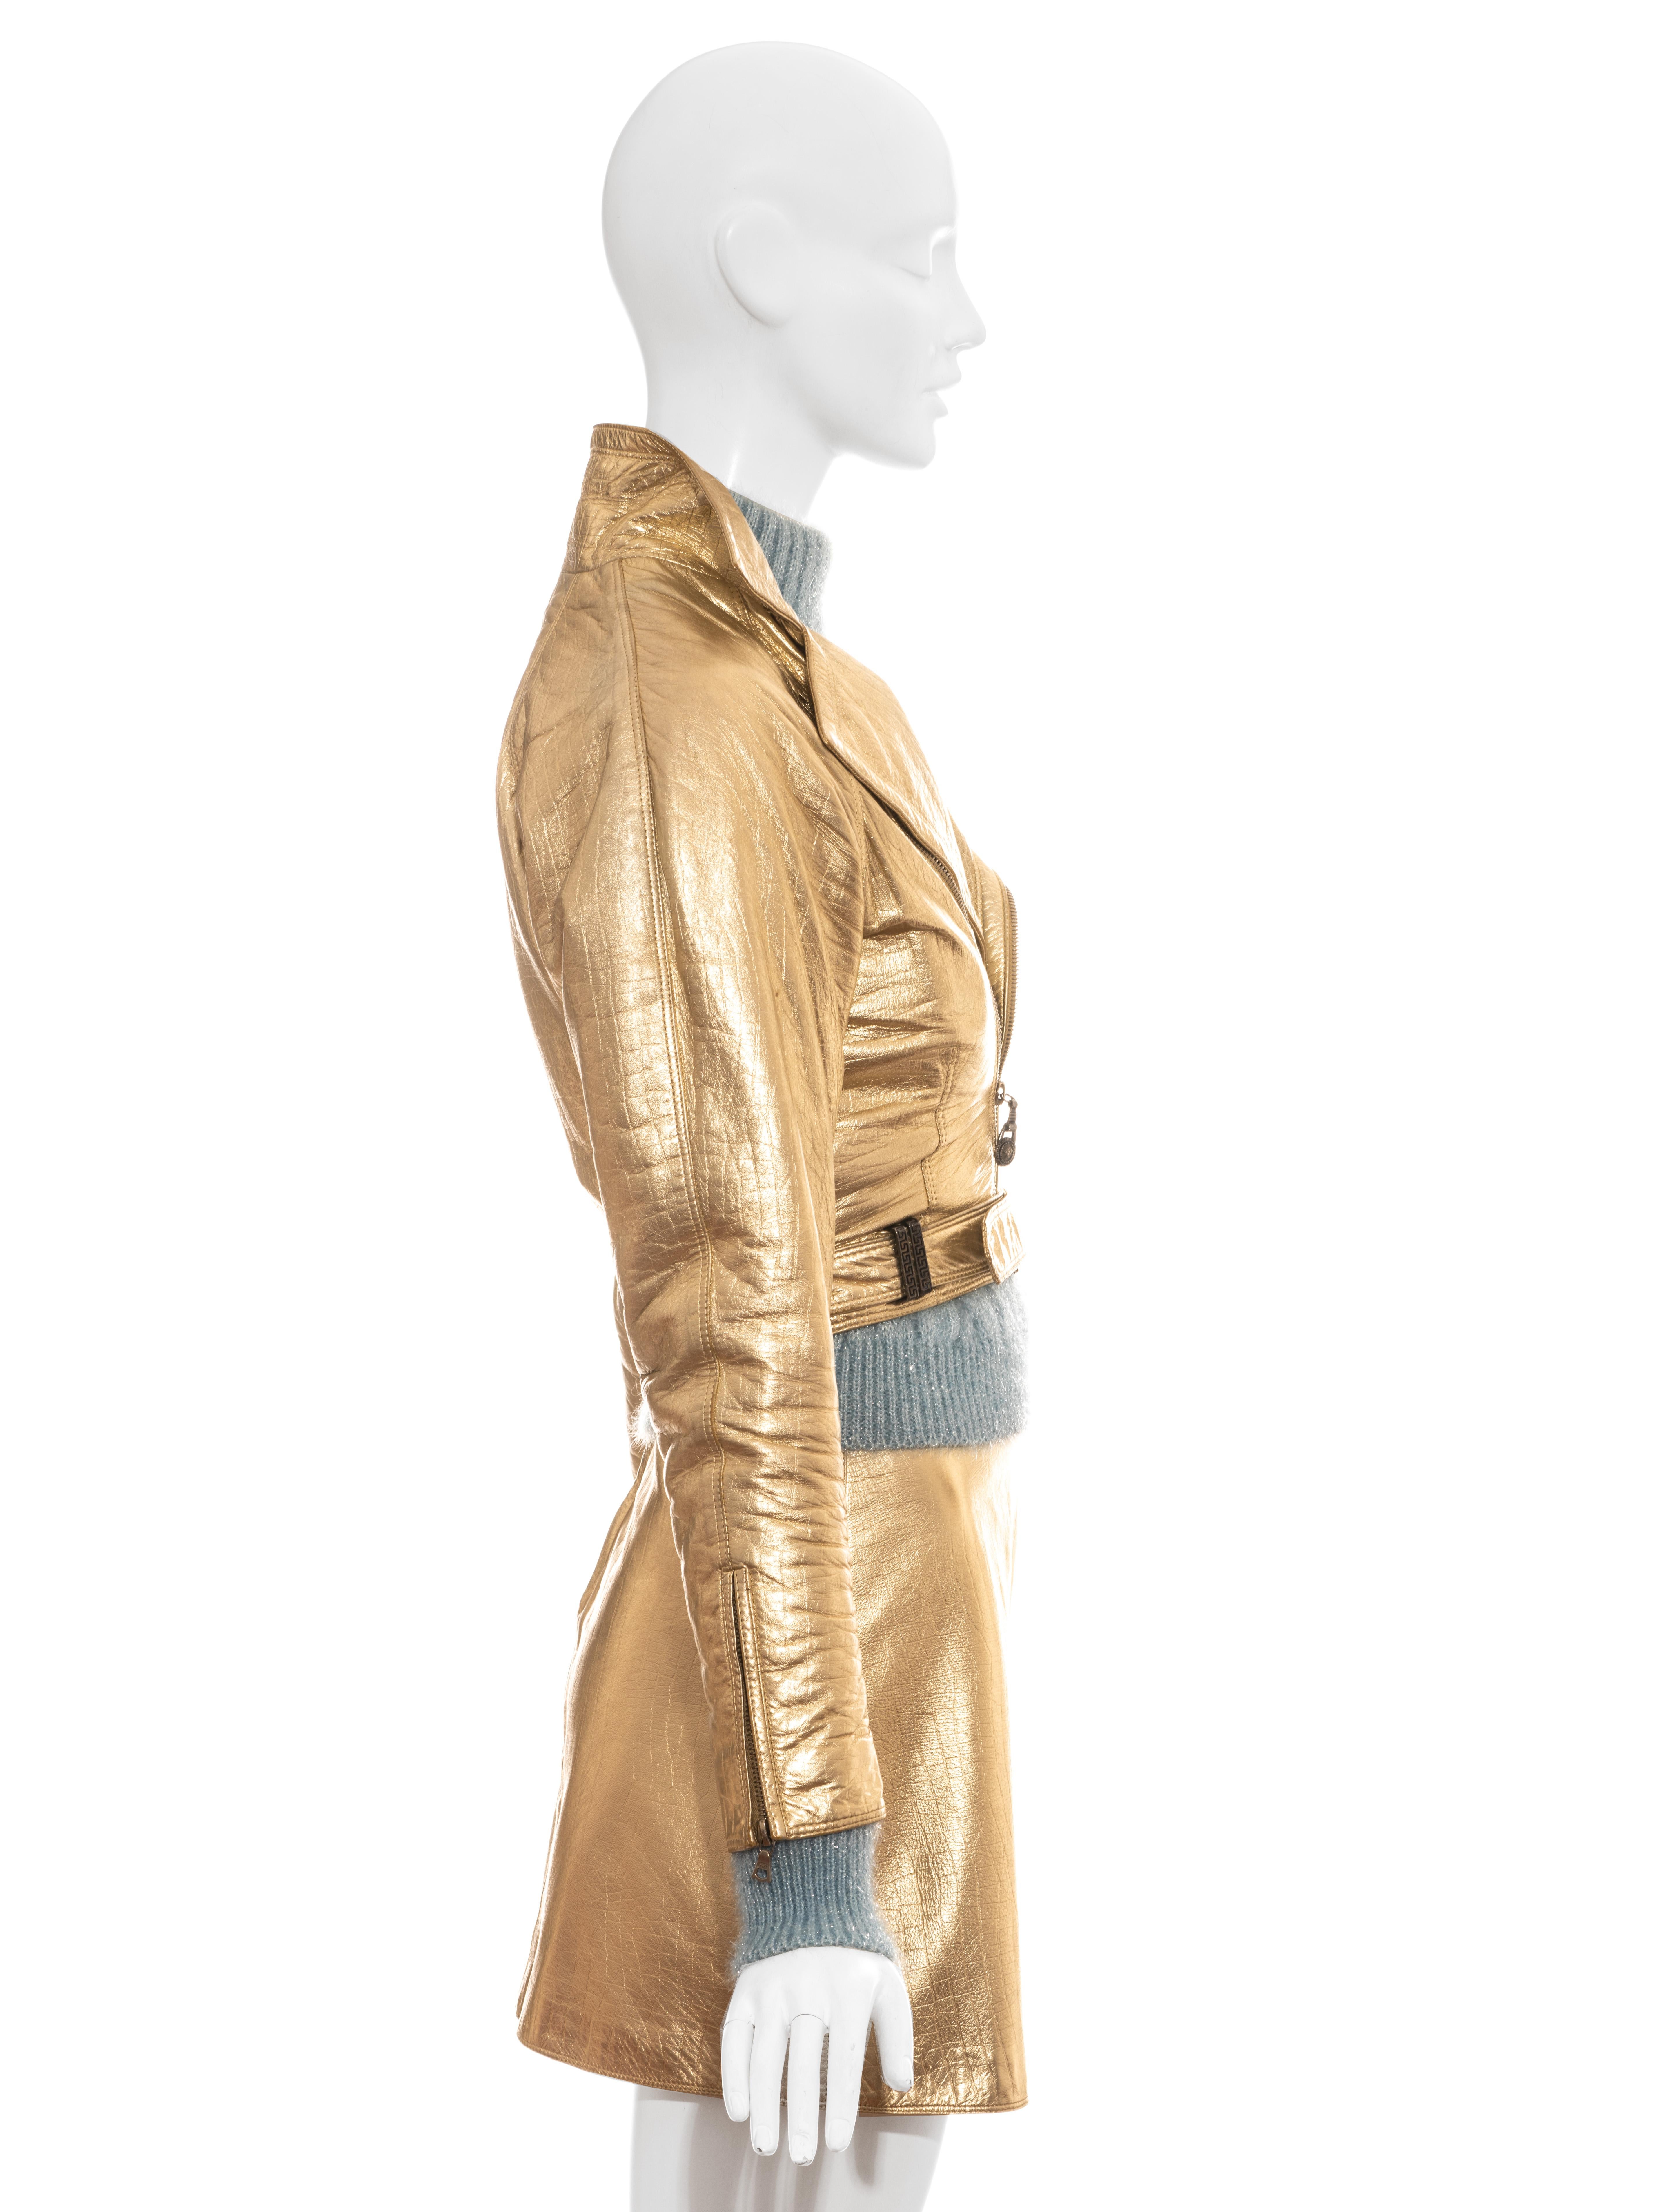 Gianni Versace gold leather four piece skirt suit, fw 1994 For Sale 1